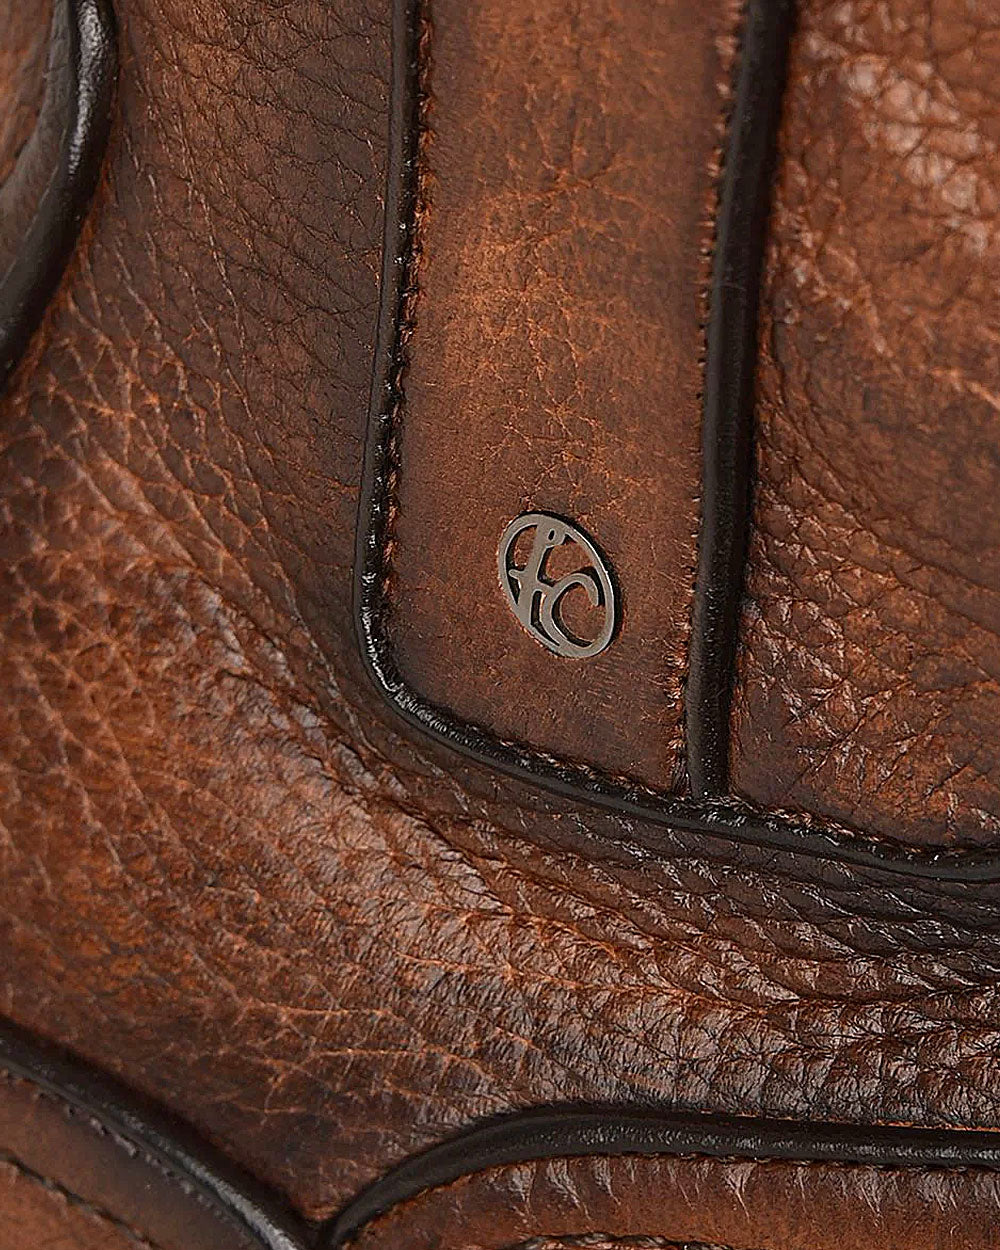 Soft Deer Leather Molds to Your Foot: Experience Cuadra's dress boot comfort.